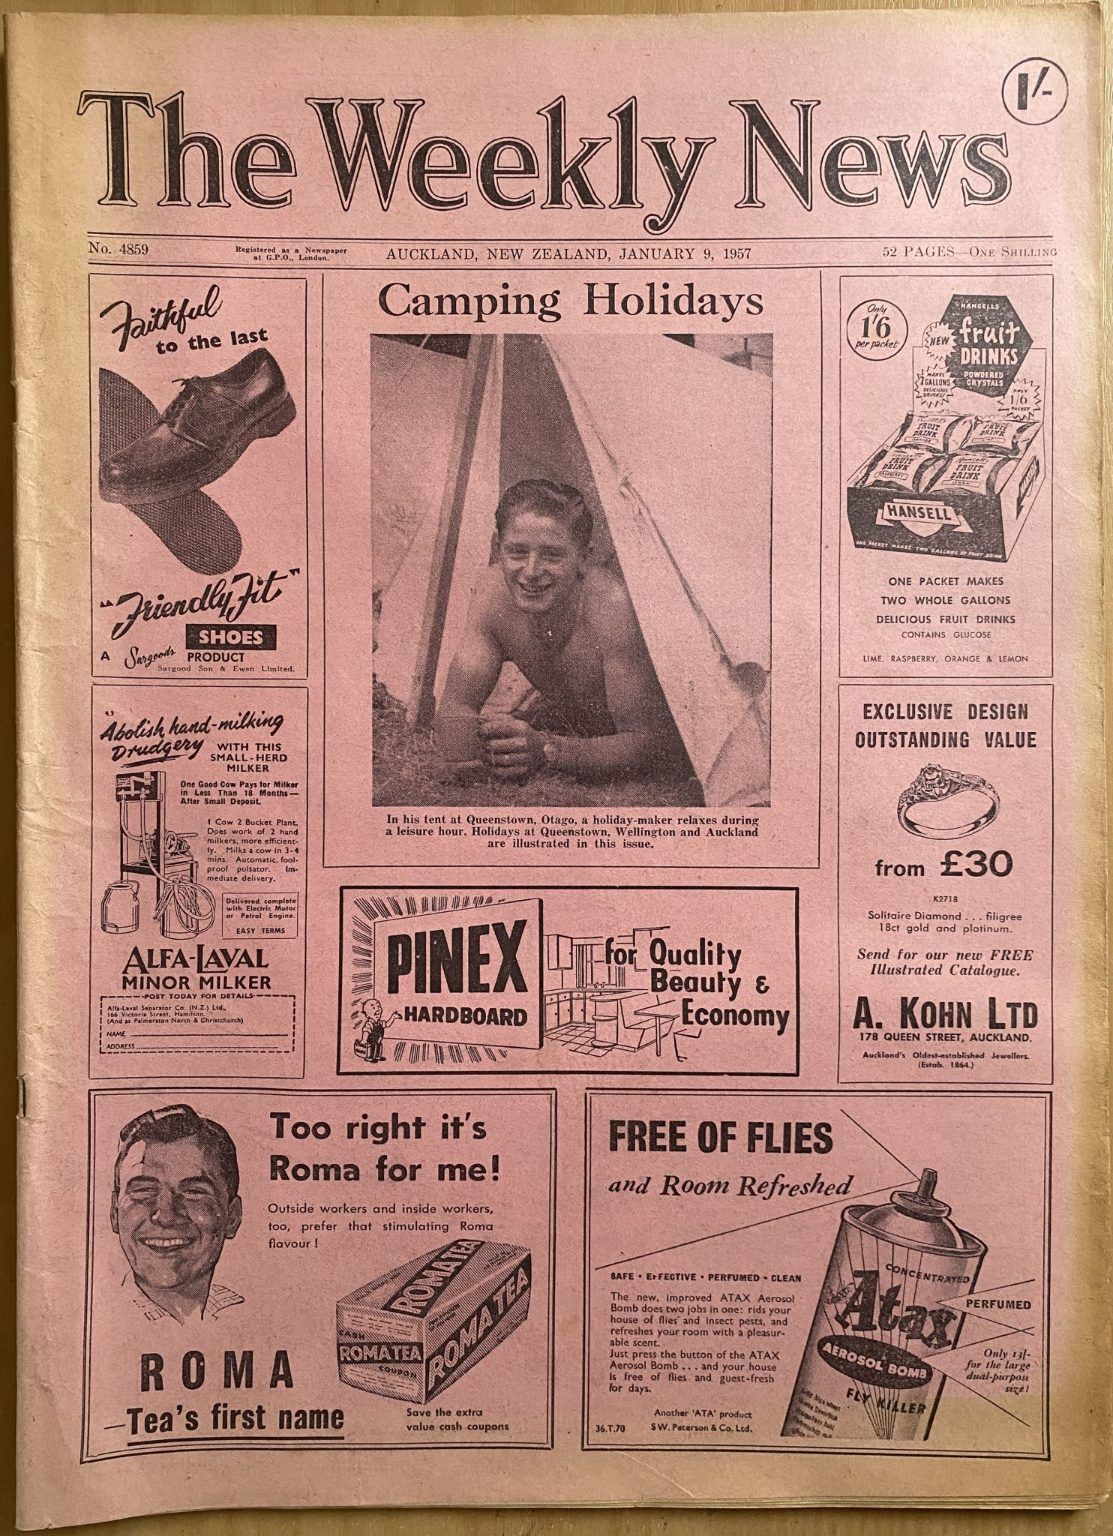 OLD NEWSPAPER: The Weekly News, No. 4859, 9 January 1957